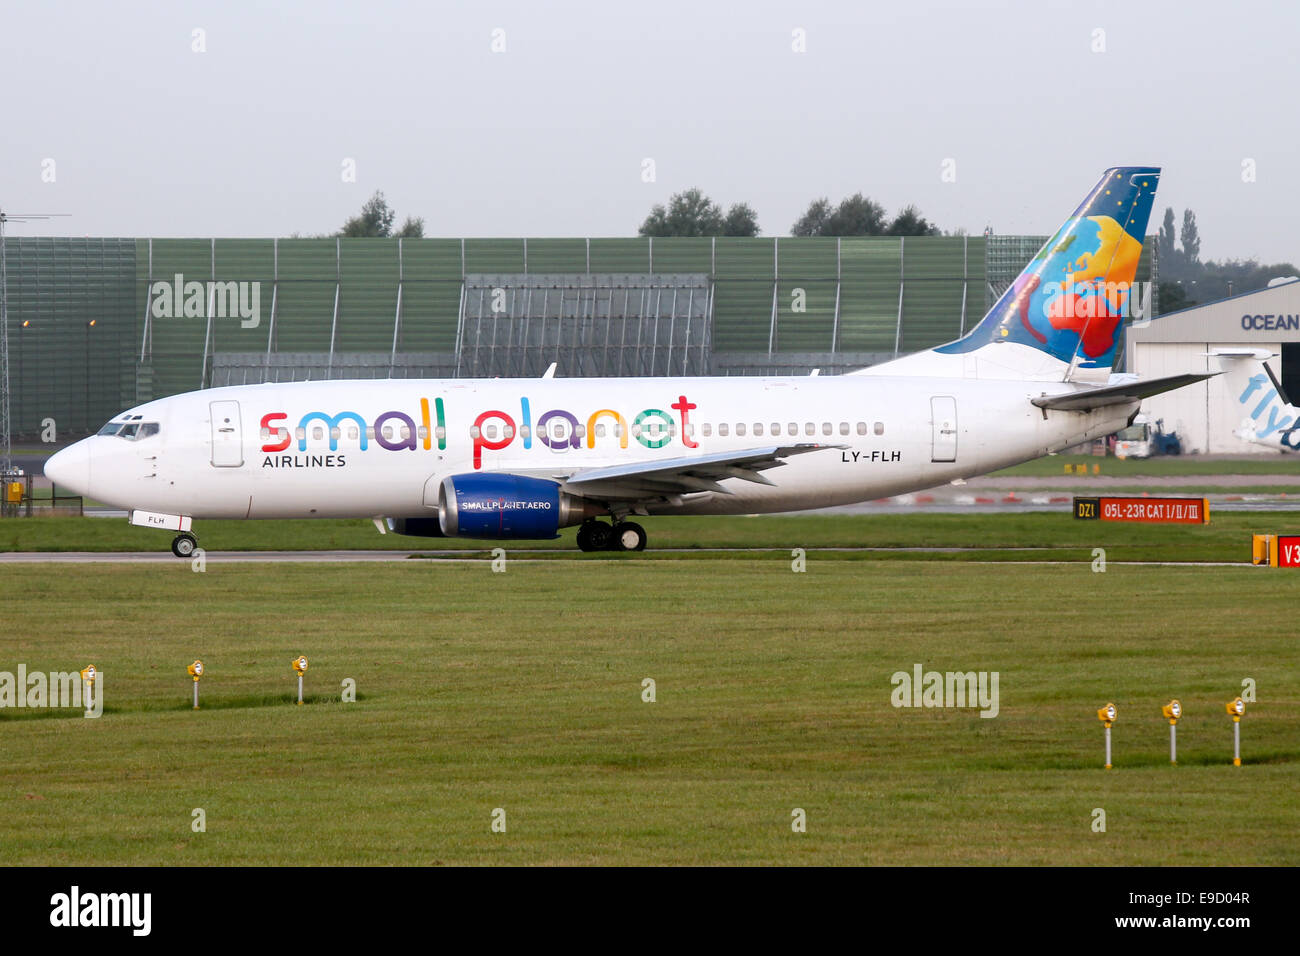 Small Planet Boeing 737-300 taxis to runway 23L at Manchester airport. Stock Photo